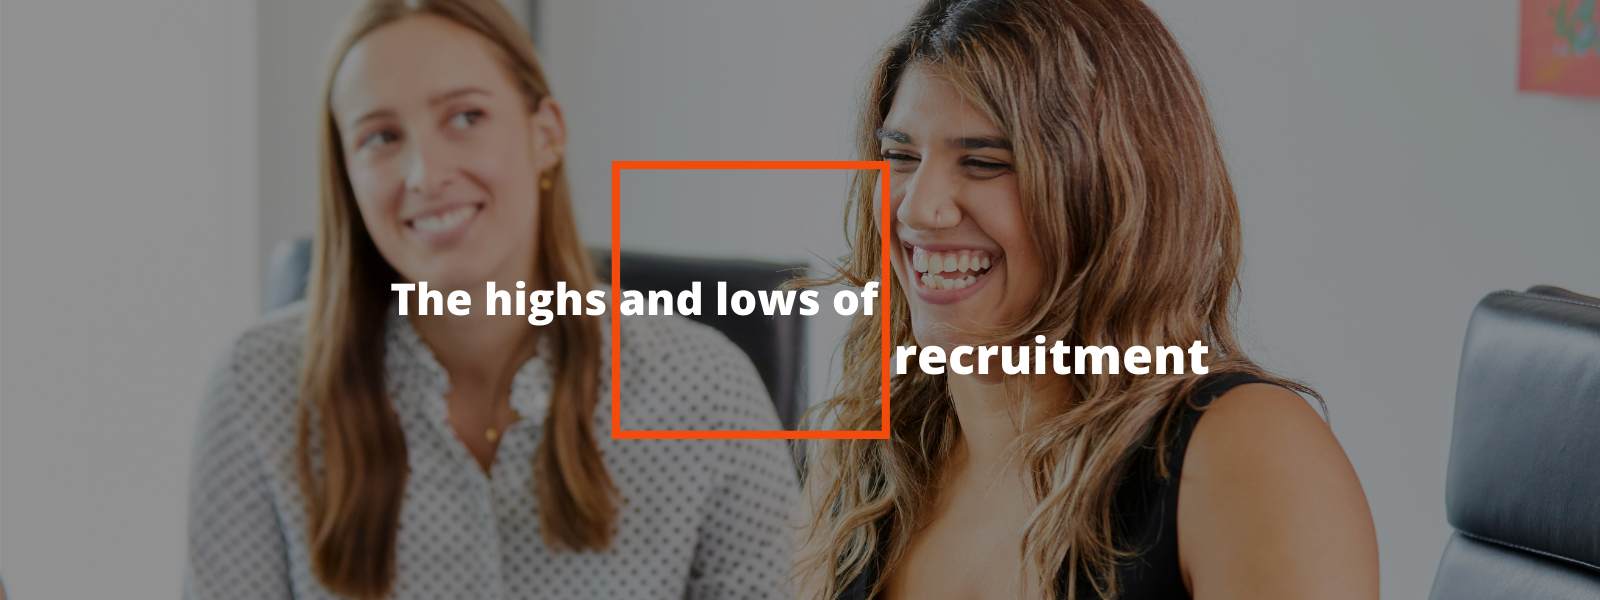 The Highs and Lows of Working in Recruitment News Banner Image